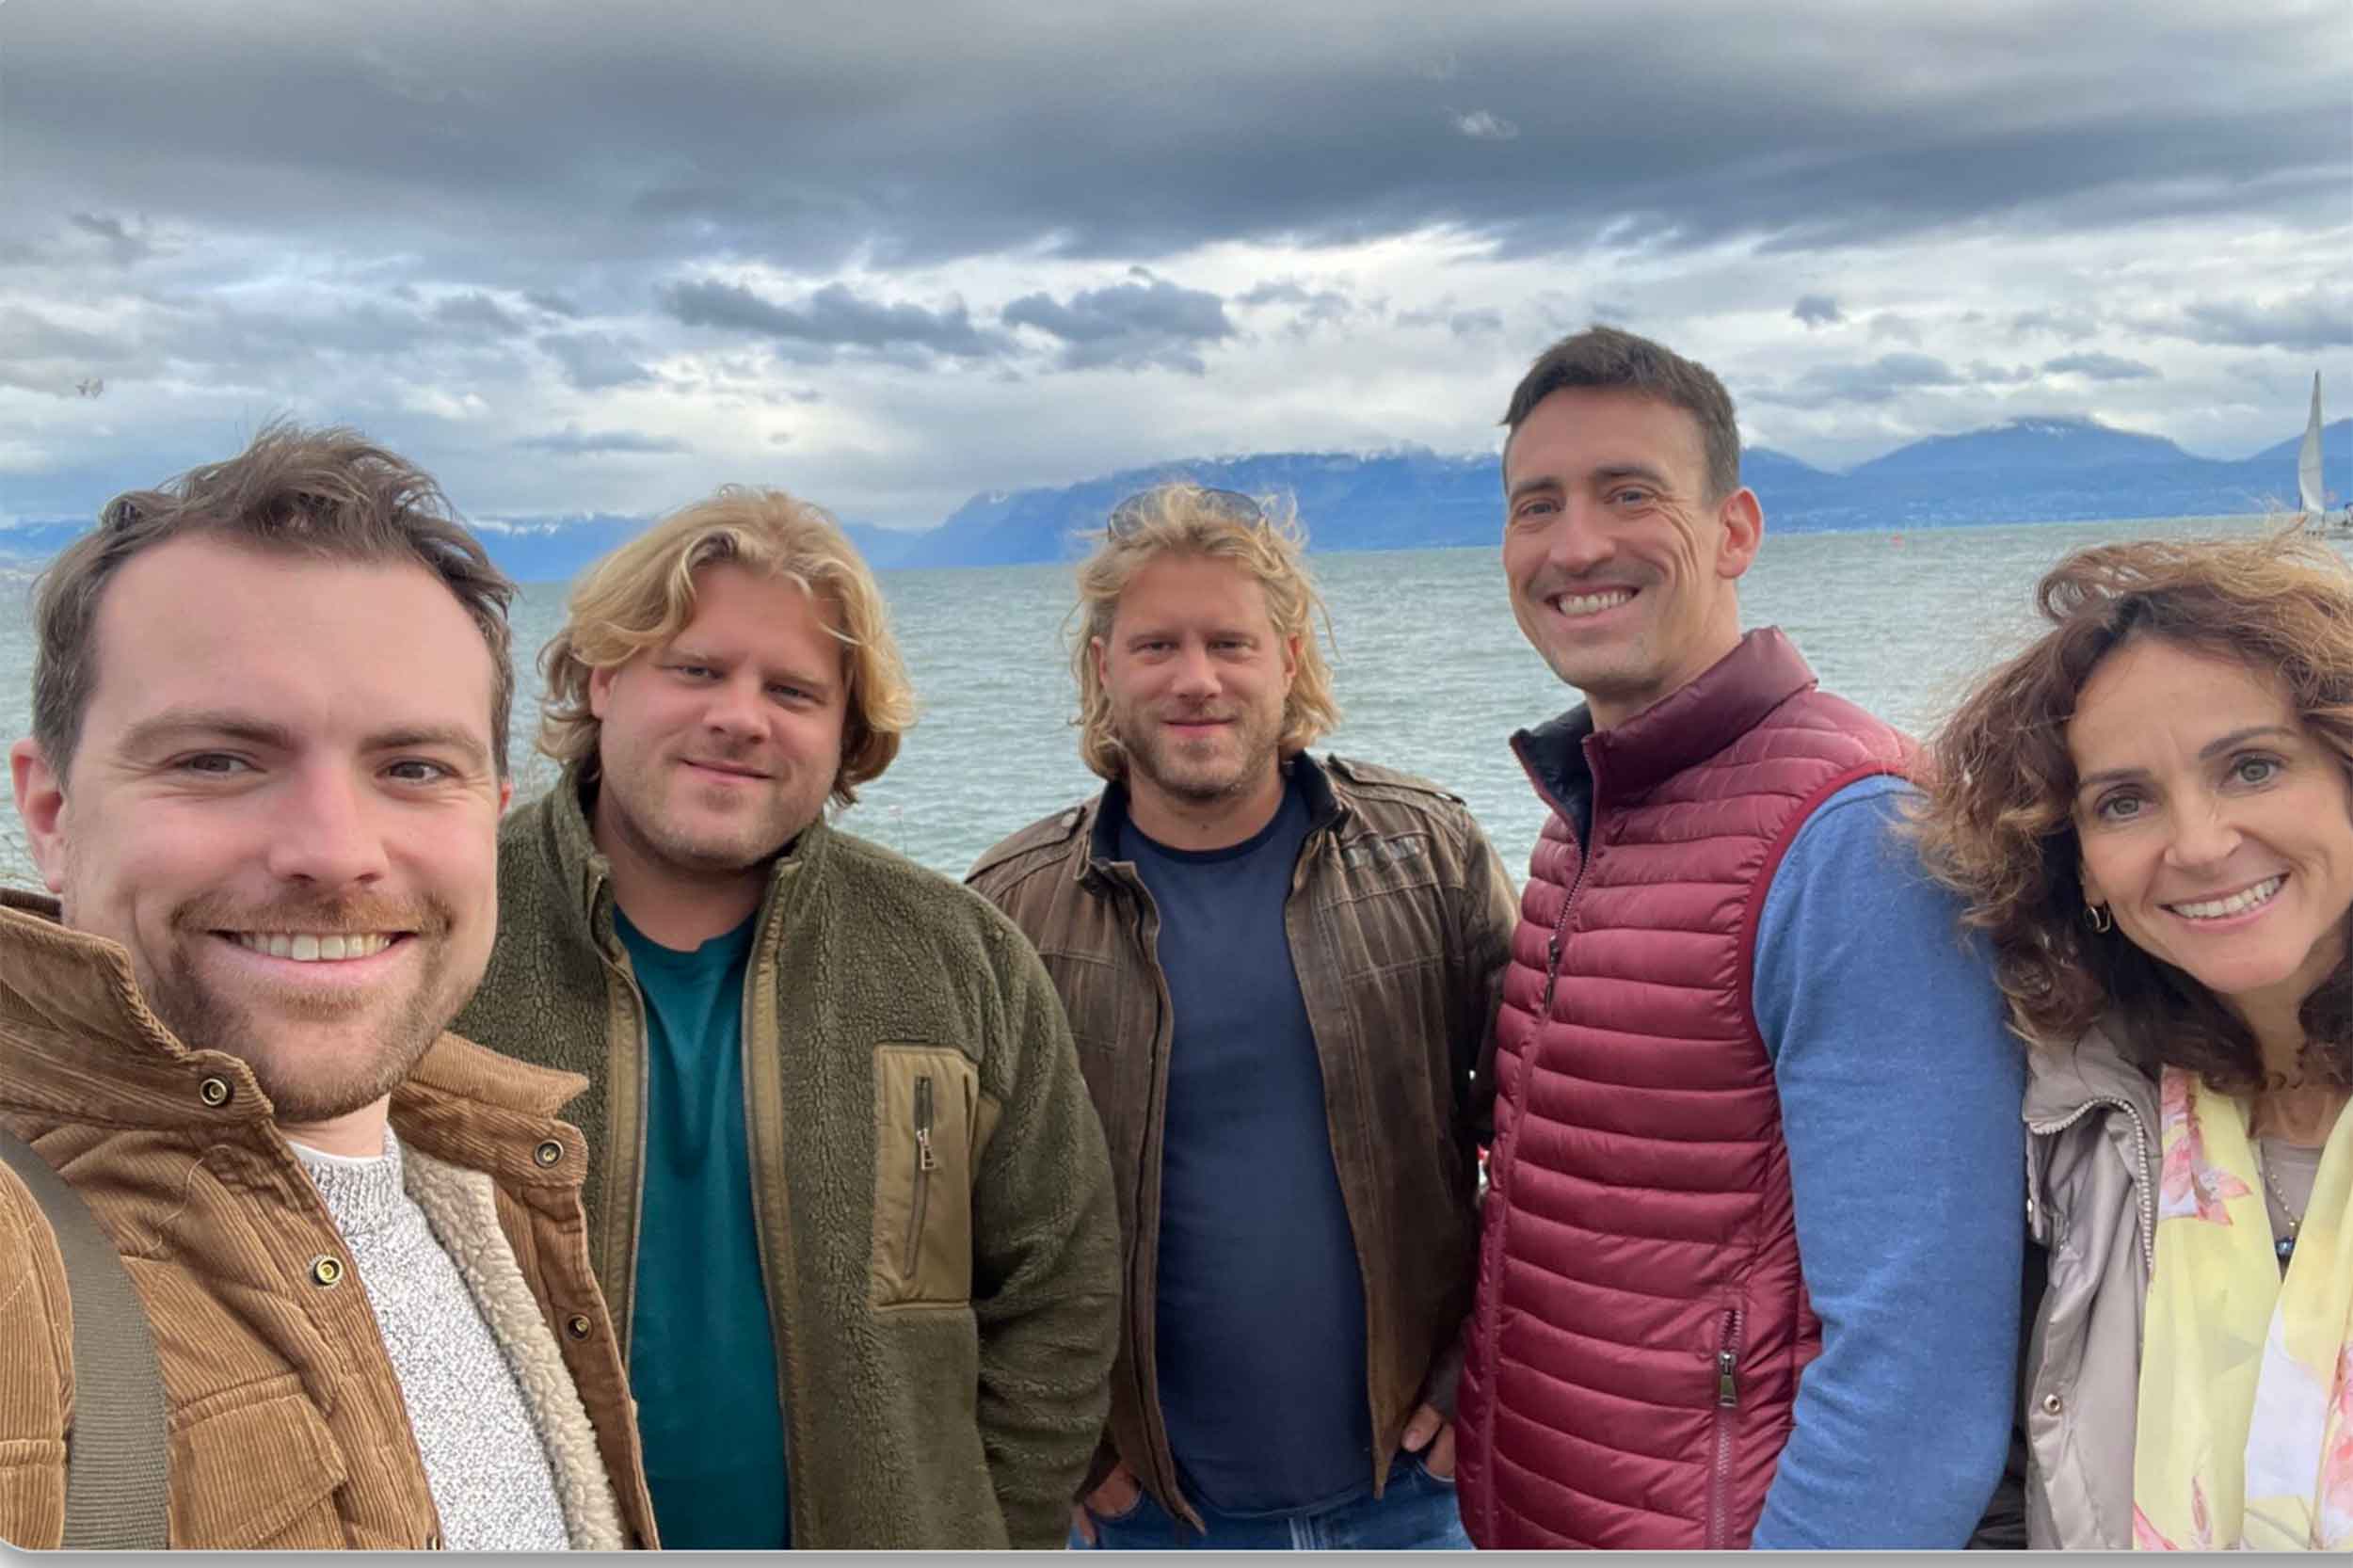 The Aerovolt team, (left to right) Guy Haydon, Alan KD and Phil KD, alongside Francois Randin and Laura Leoncini from EATON, met in Lausanne, Switzerland to discuss the smart charger rollout in the UK